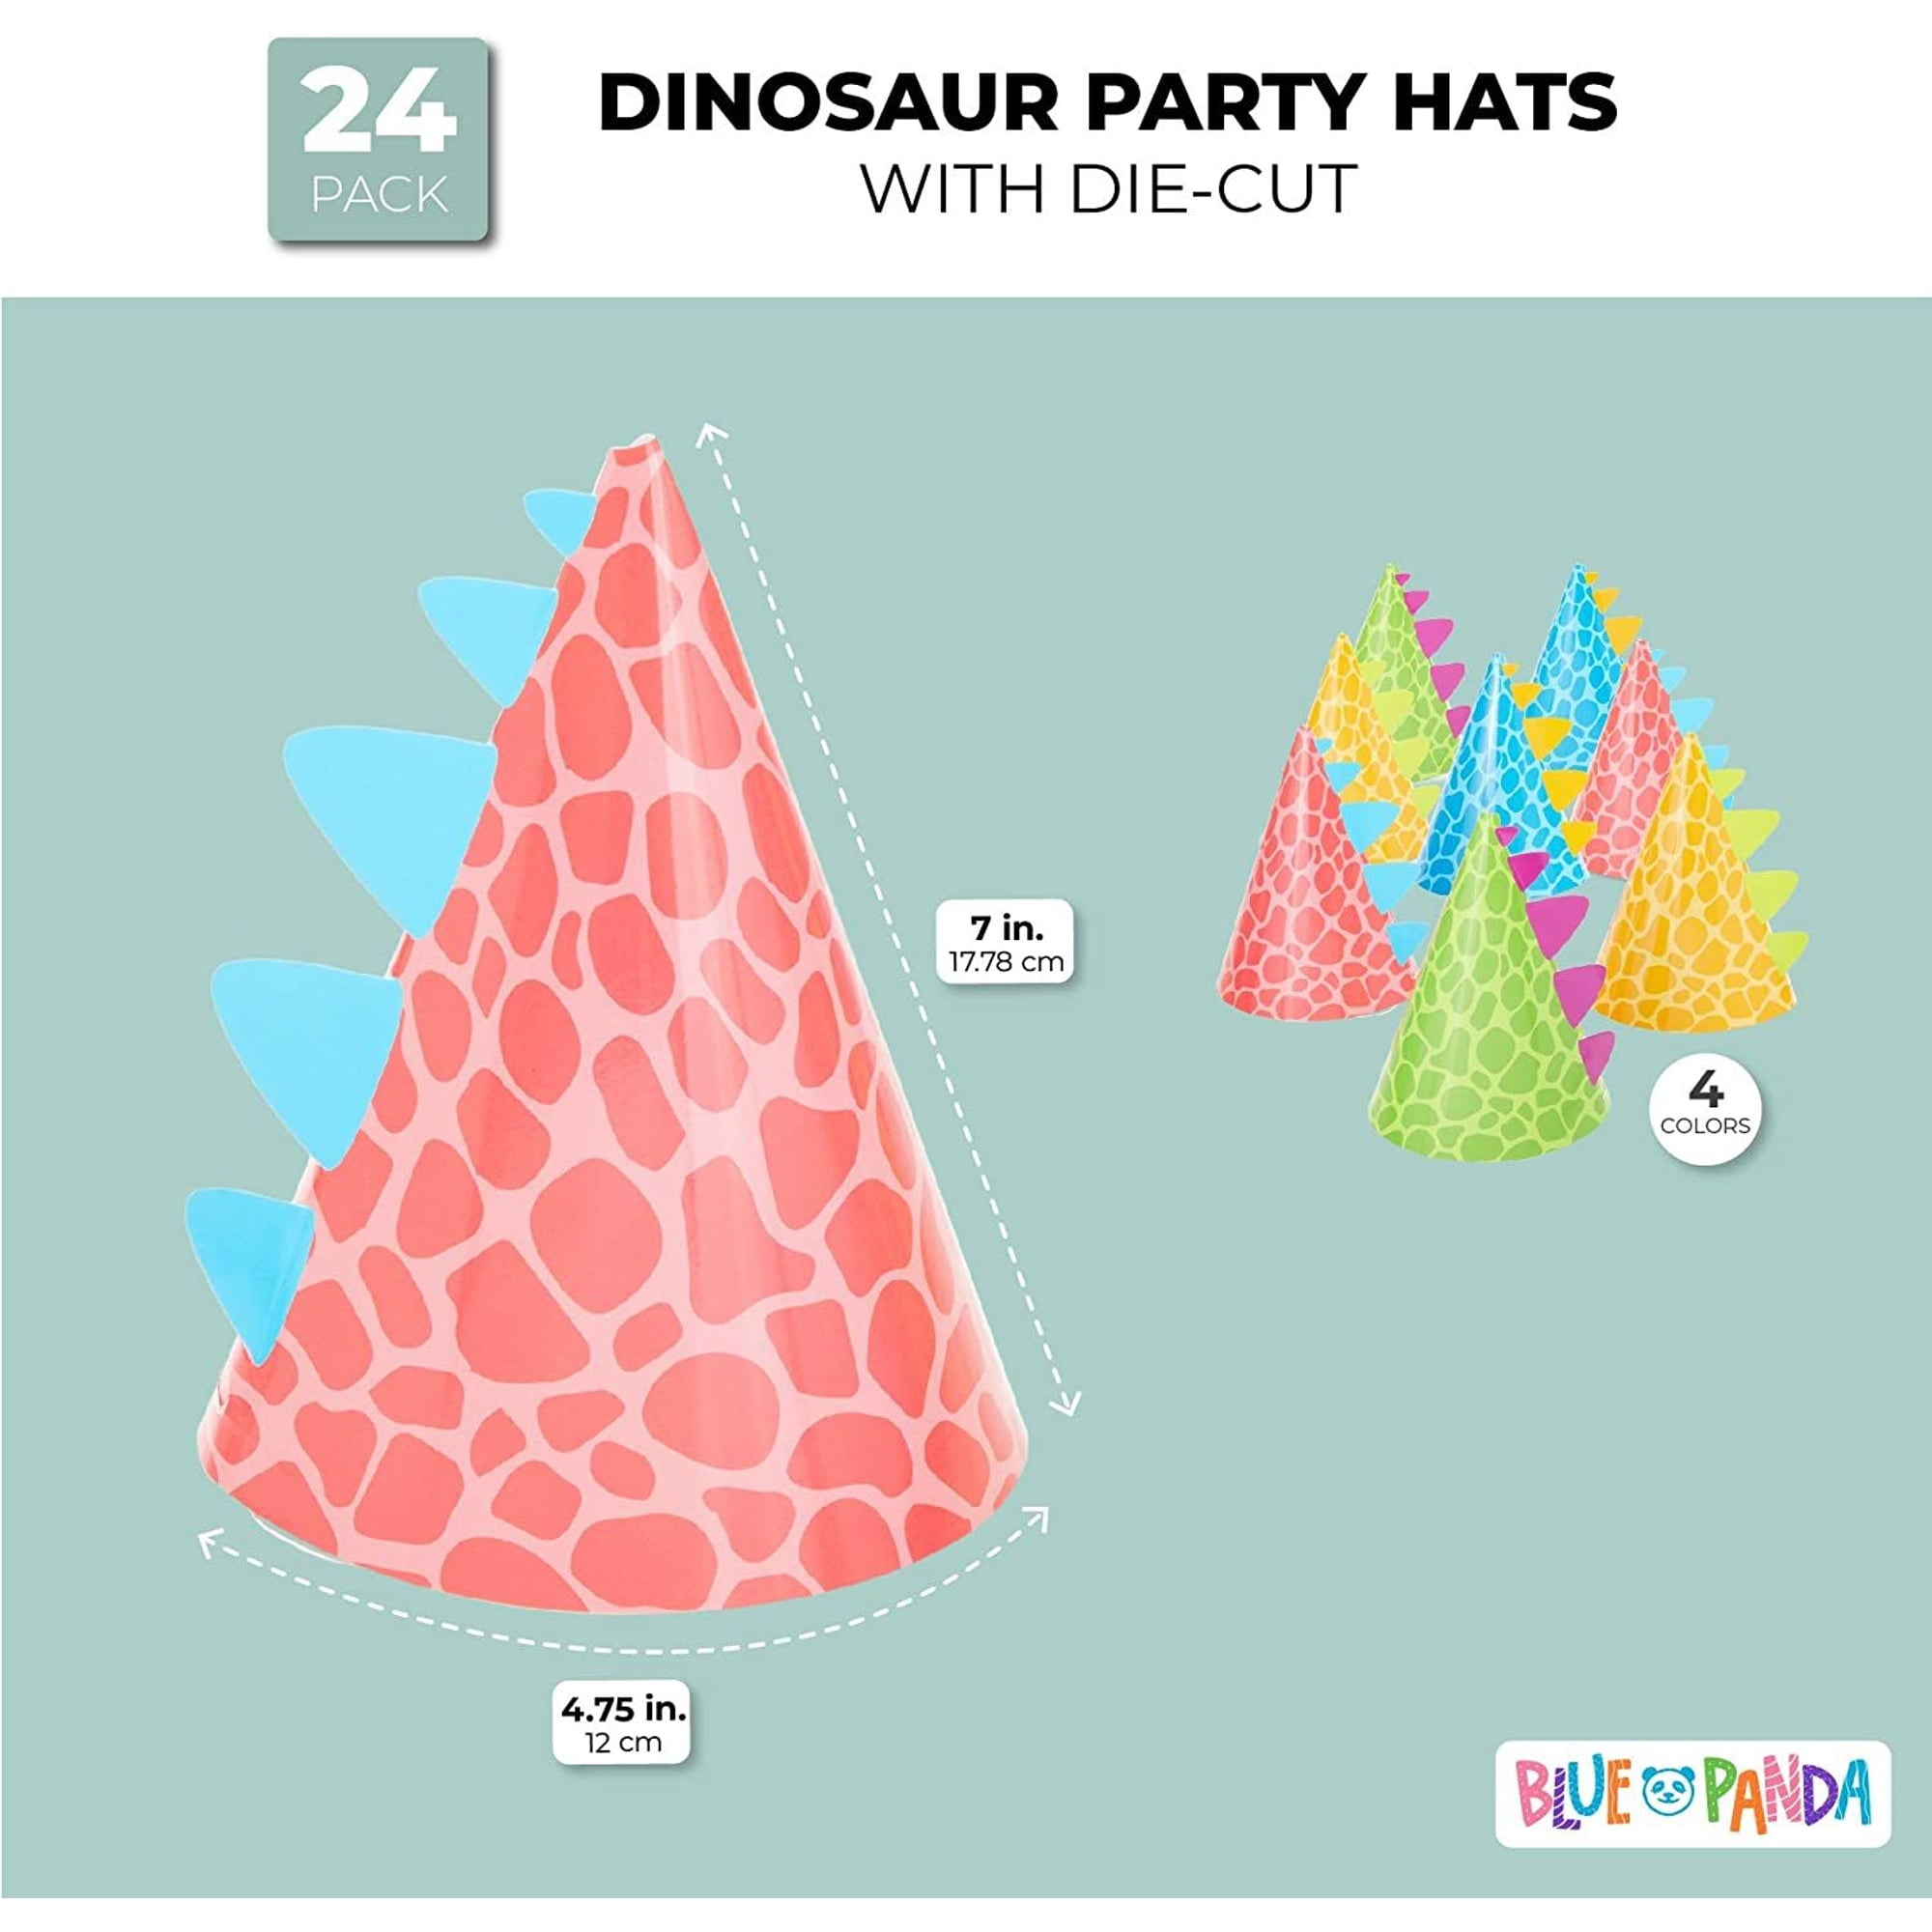 WERNNSAI Pin The Hat on The Dinosaur Game - Dinosaur Party Games for Girls  Dino Poster 20'' x 29'' with 24 PCS Hats Baby Shower Birthday Party